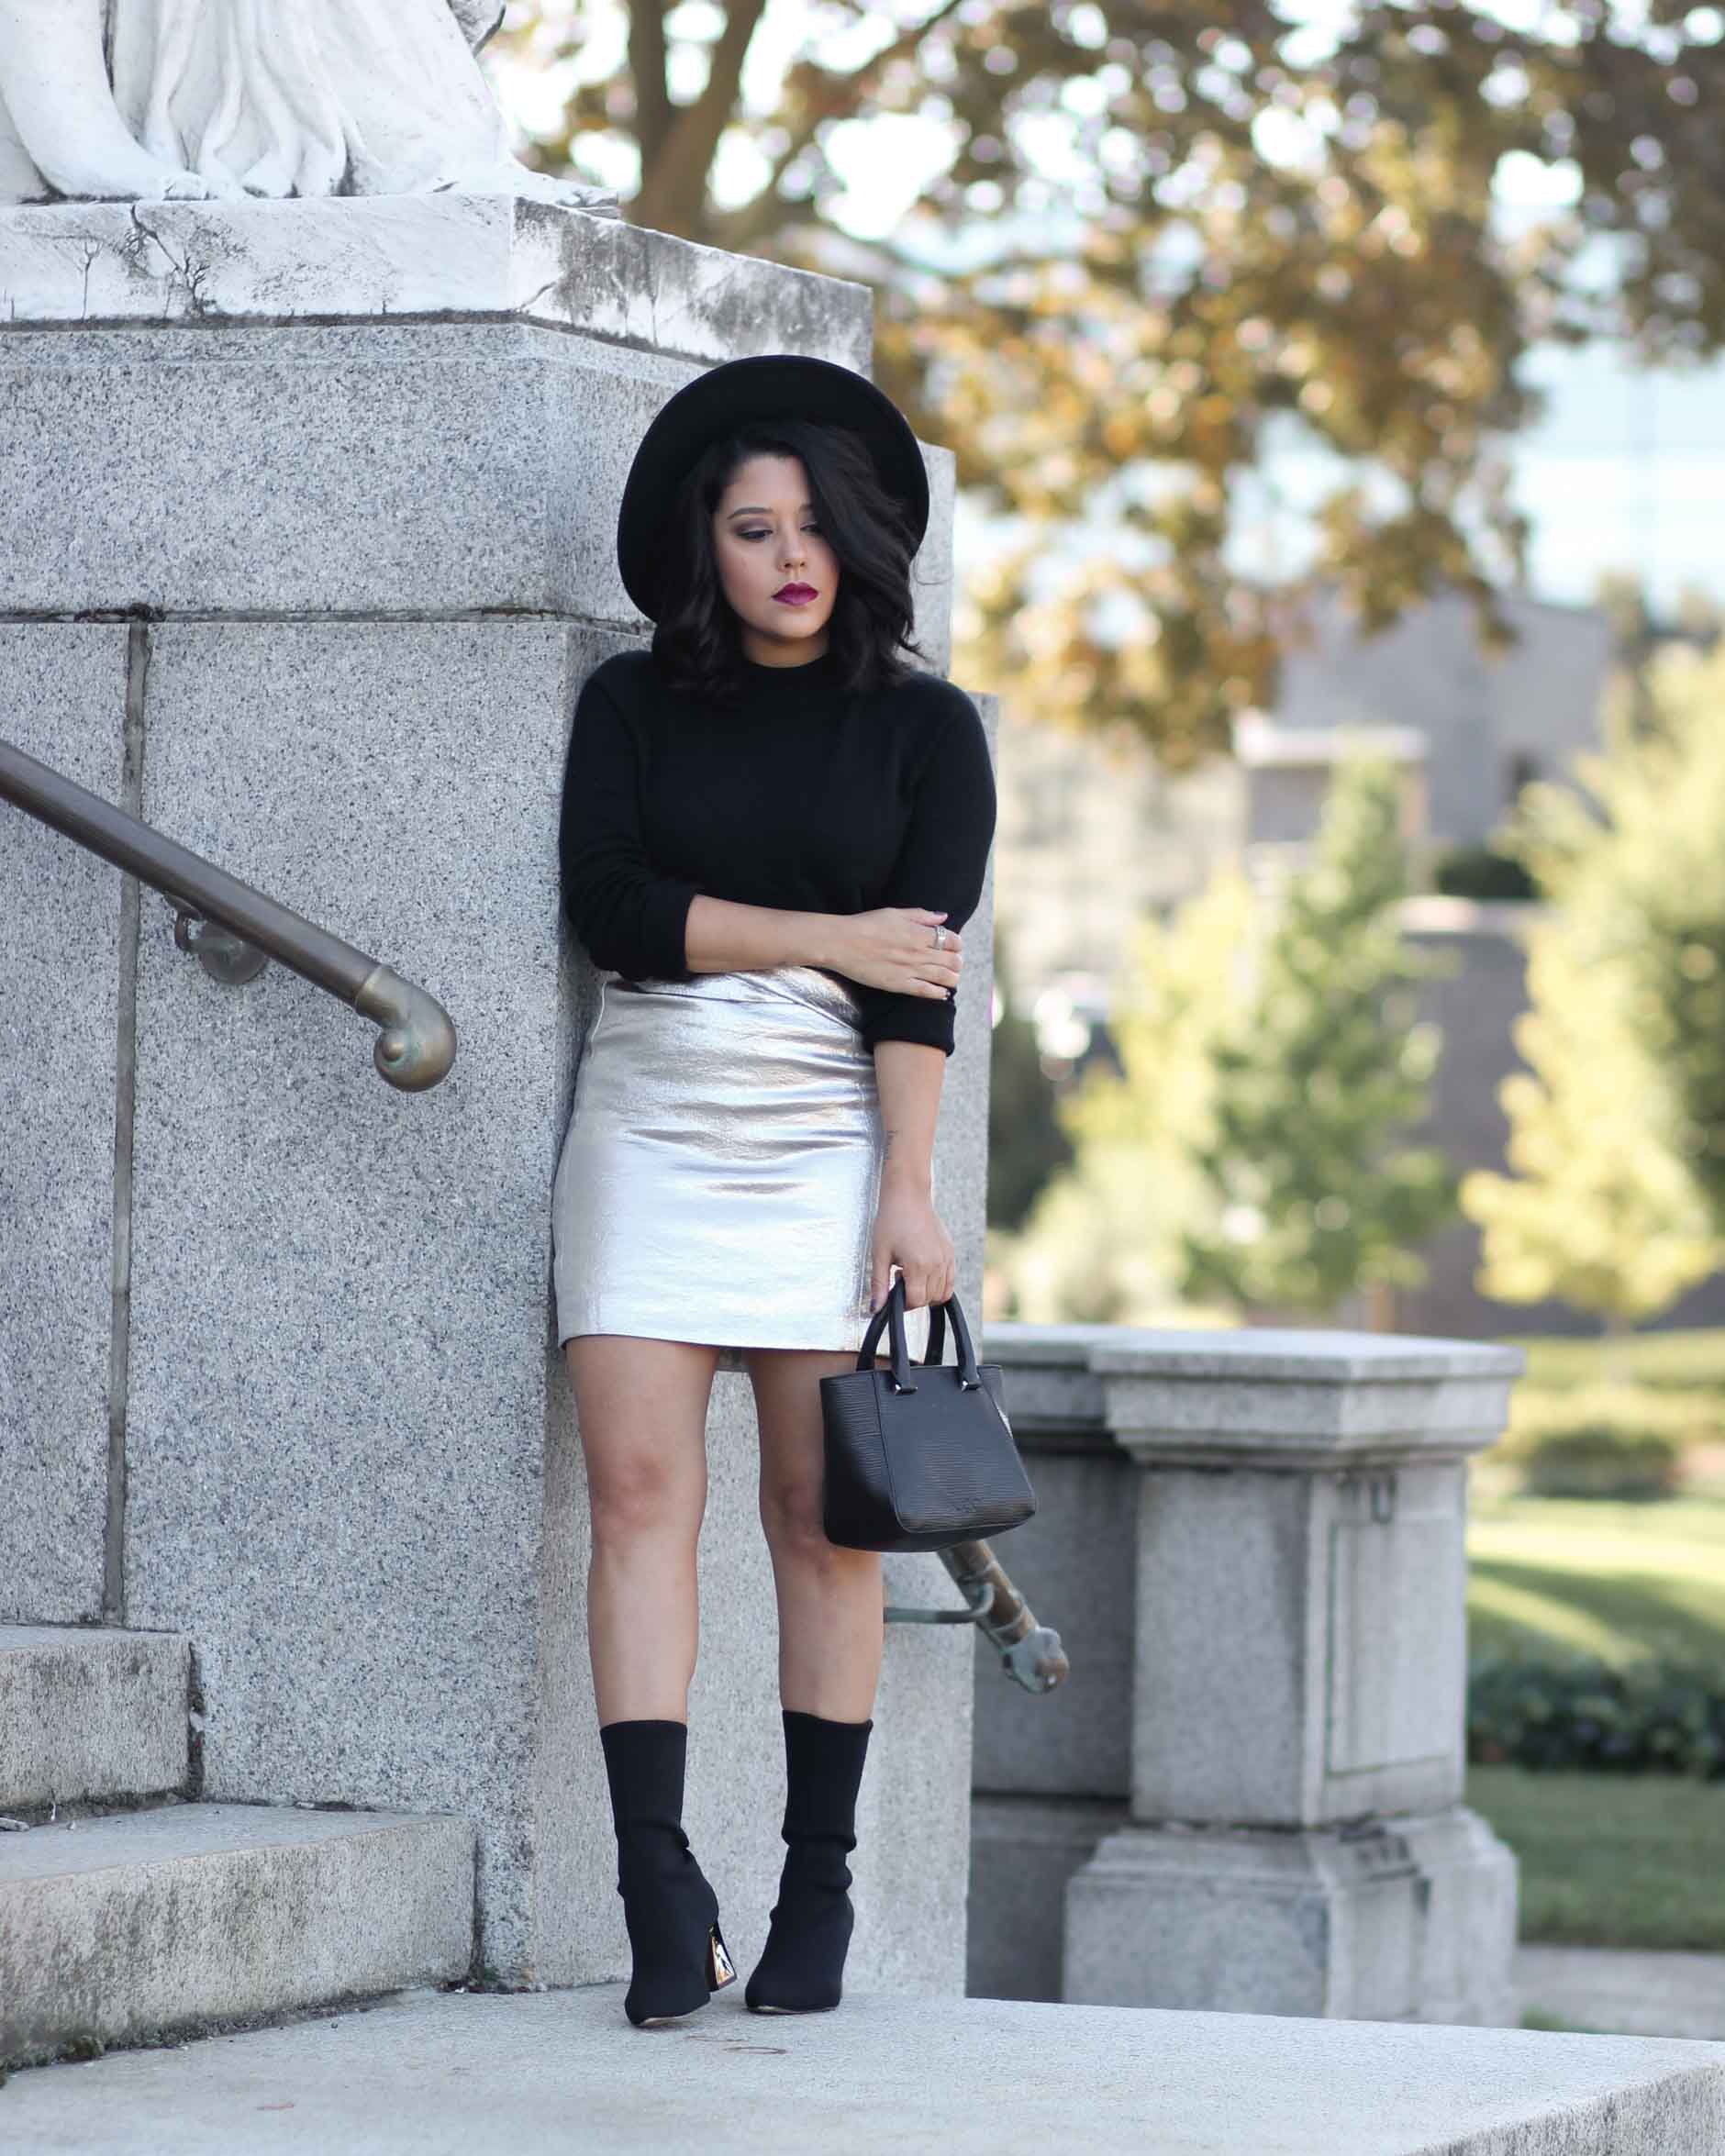 1 Faux Leather Pencil Skirt, 8 Ways: My Own Personal Style